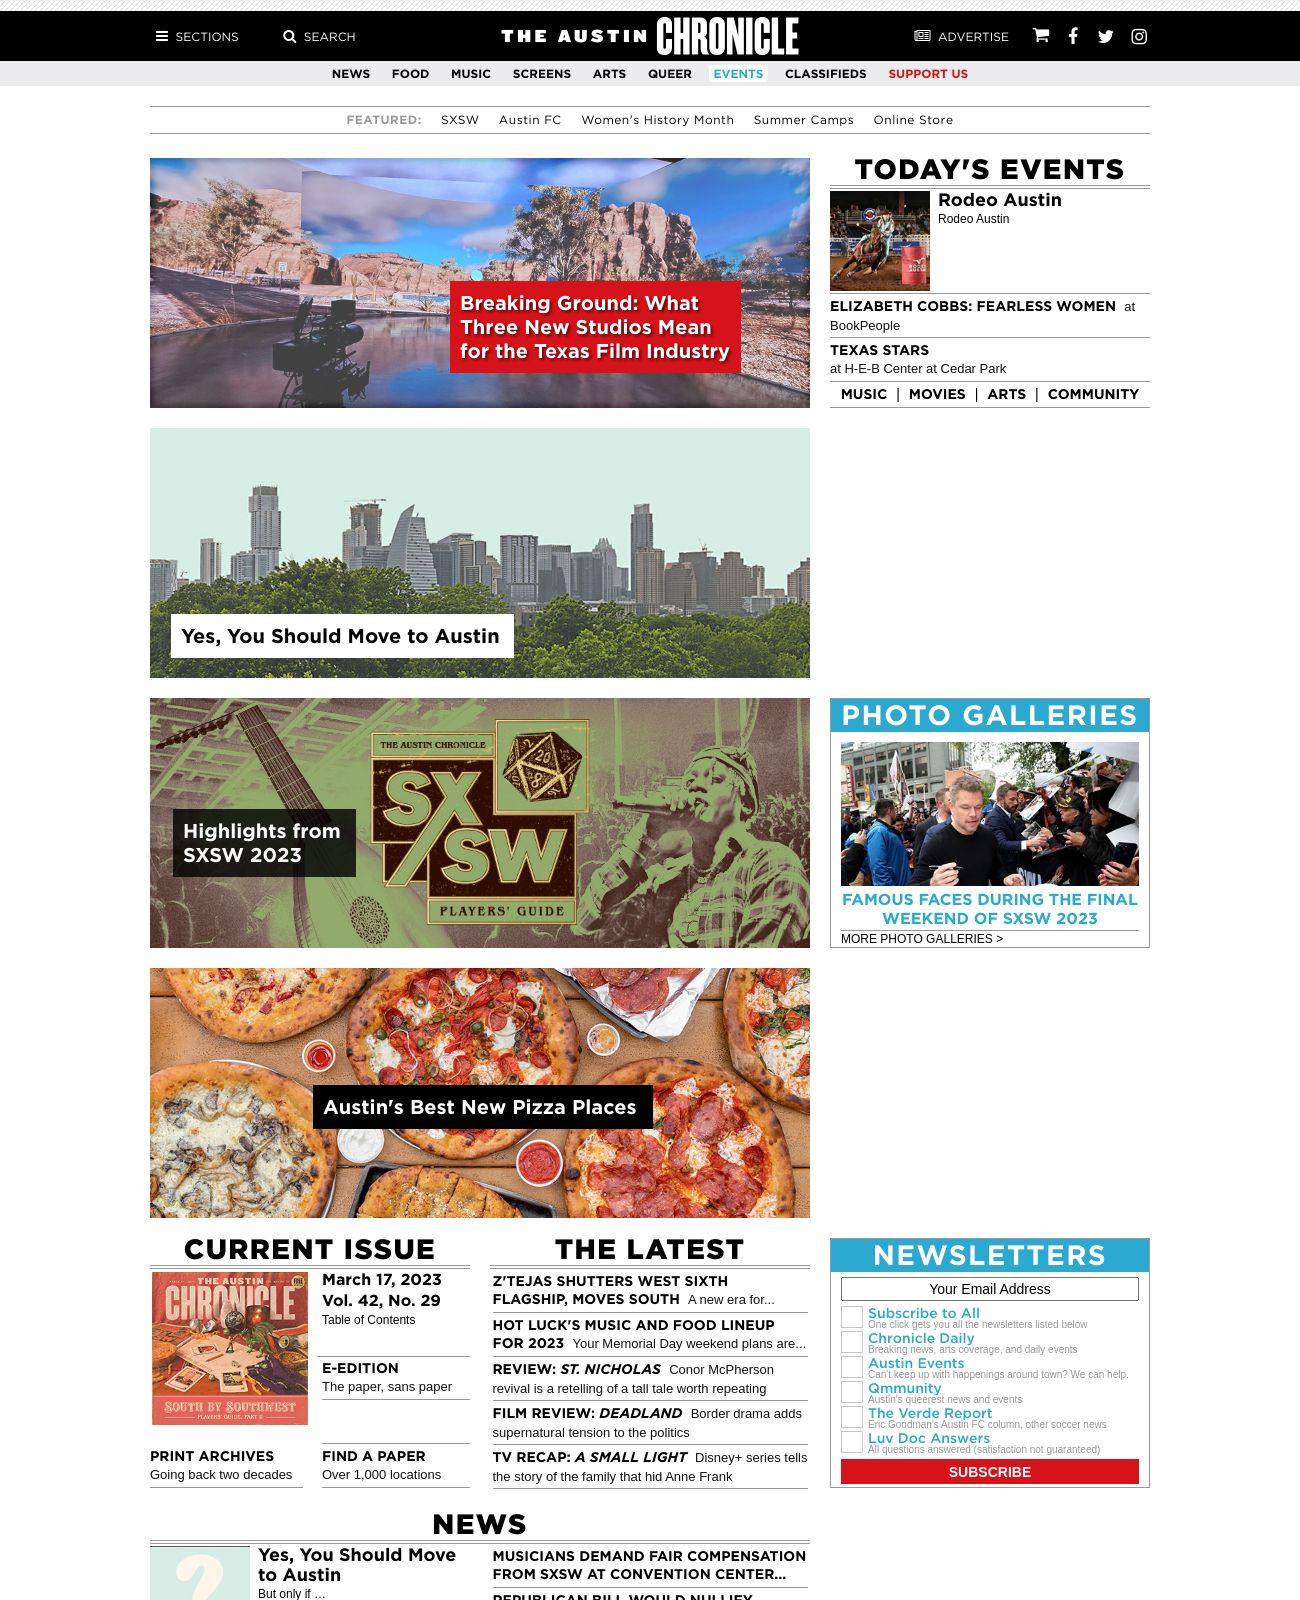 Austin Chronicle at 2023-03-21 17:19:04-05:00 local time